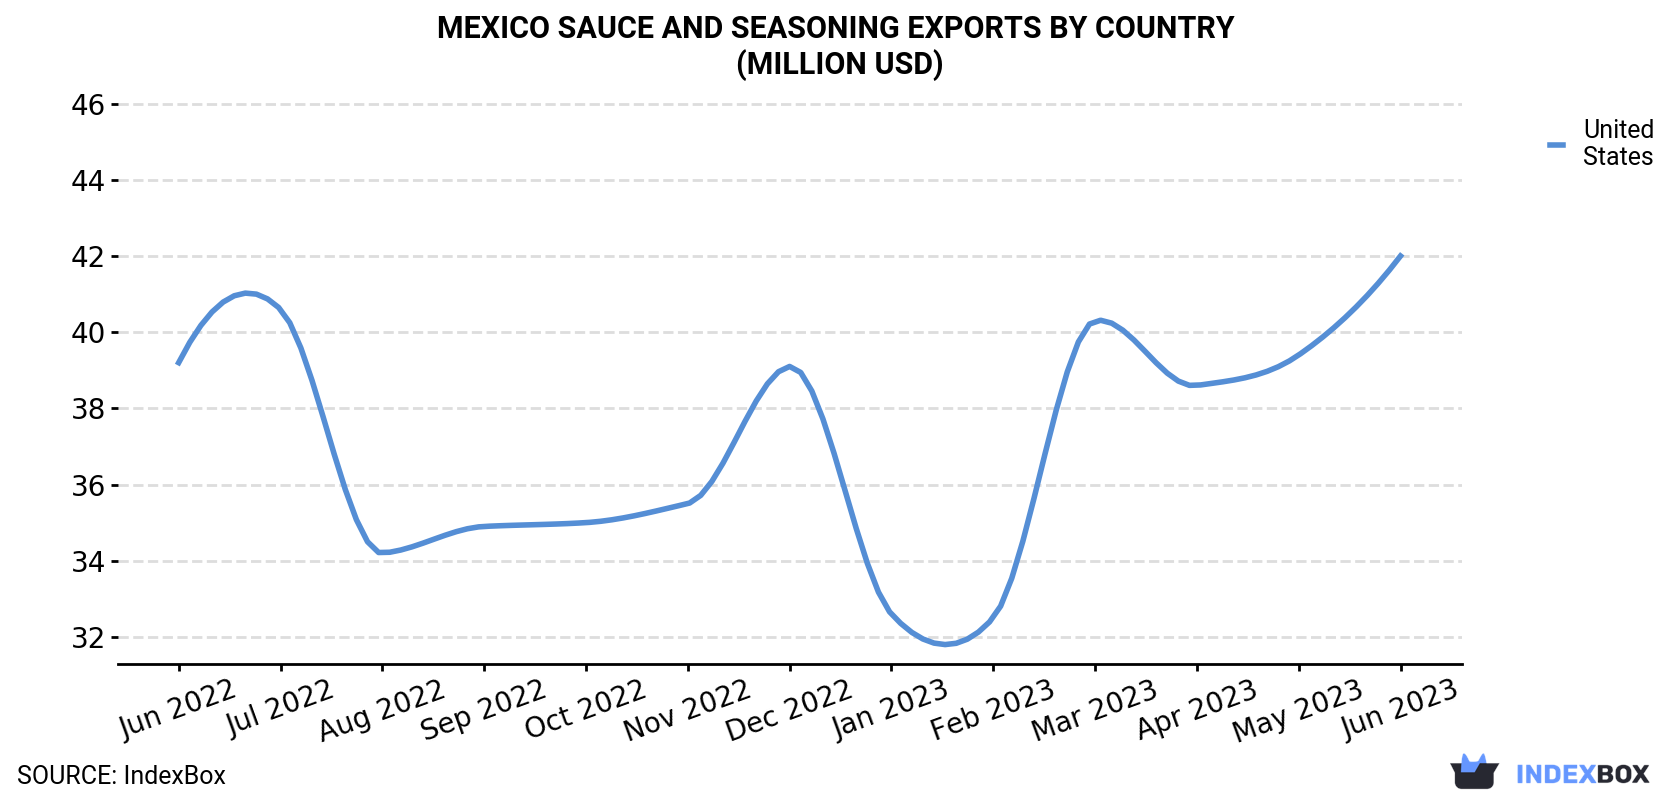 Mexico Sauce and Seasoning Exports By Country (Million USD)